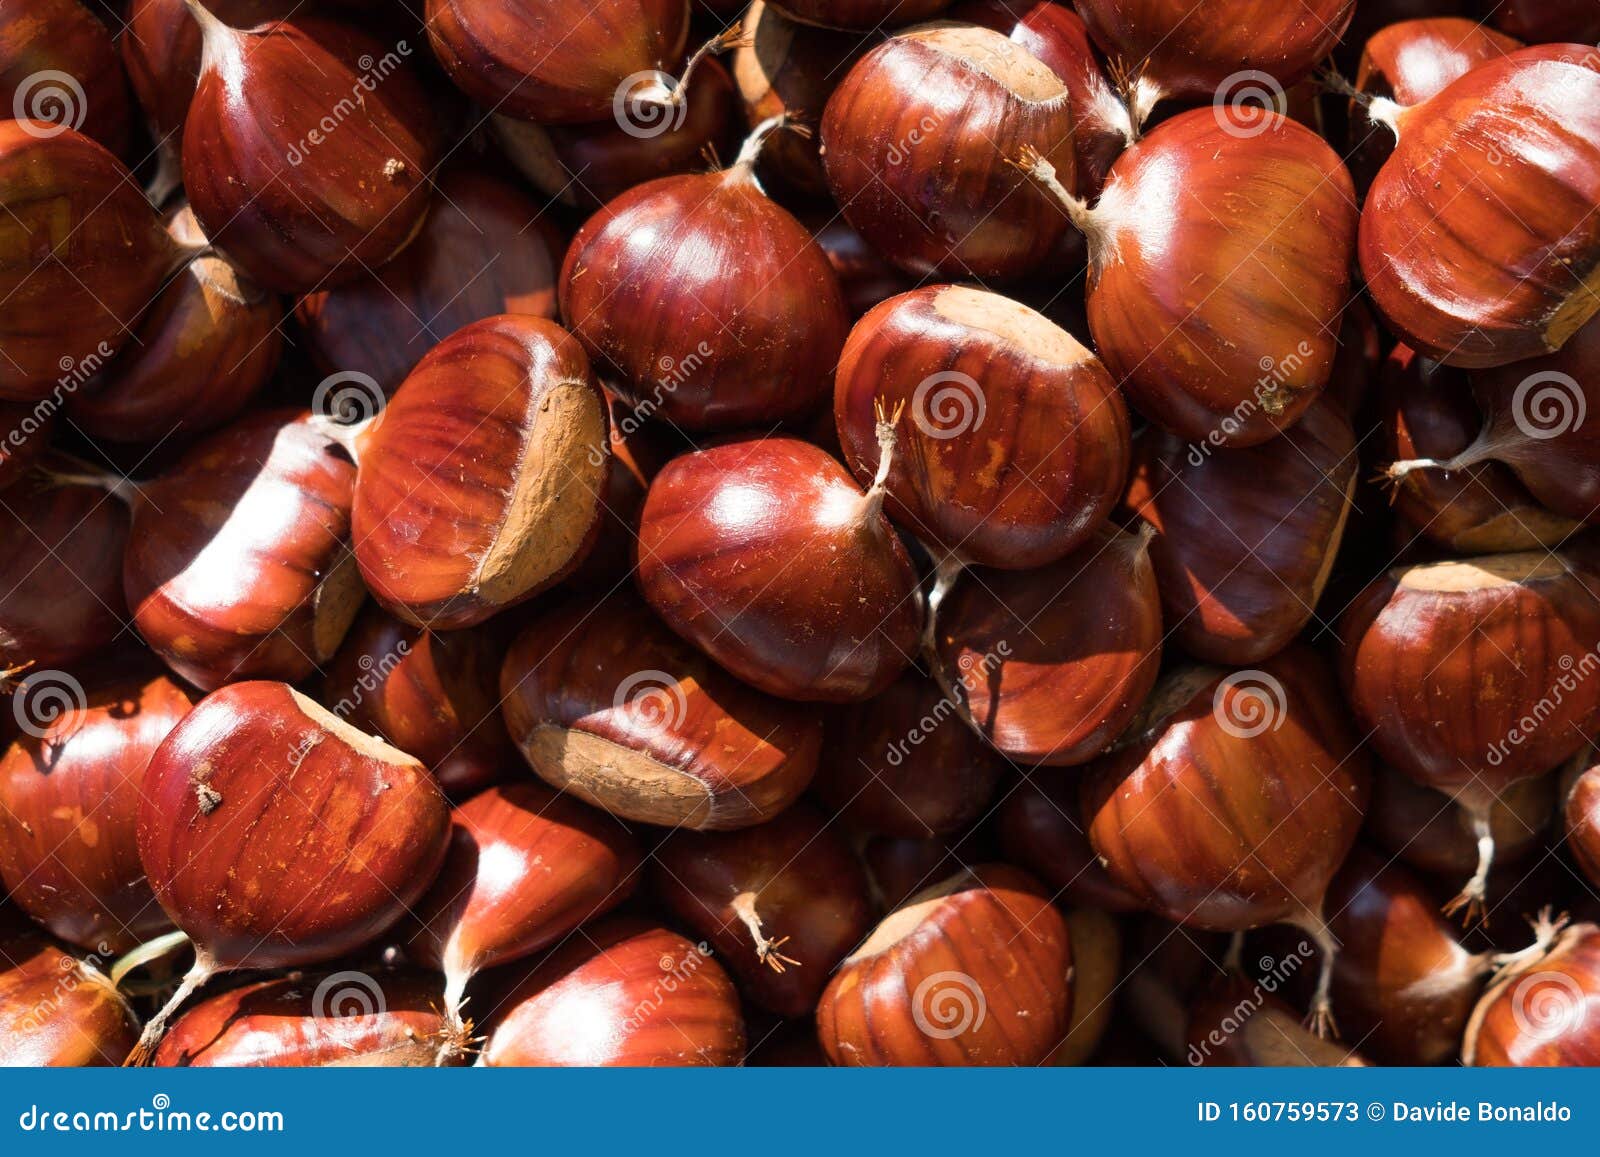 close up of brown fresh chestnuts in a basket during autumn harvest, whole fresh and seasonal food for a healthy diet